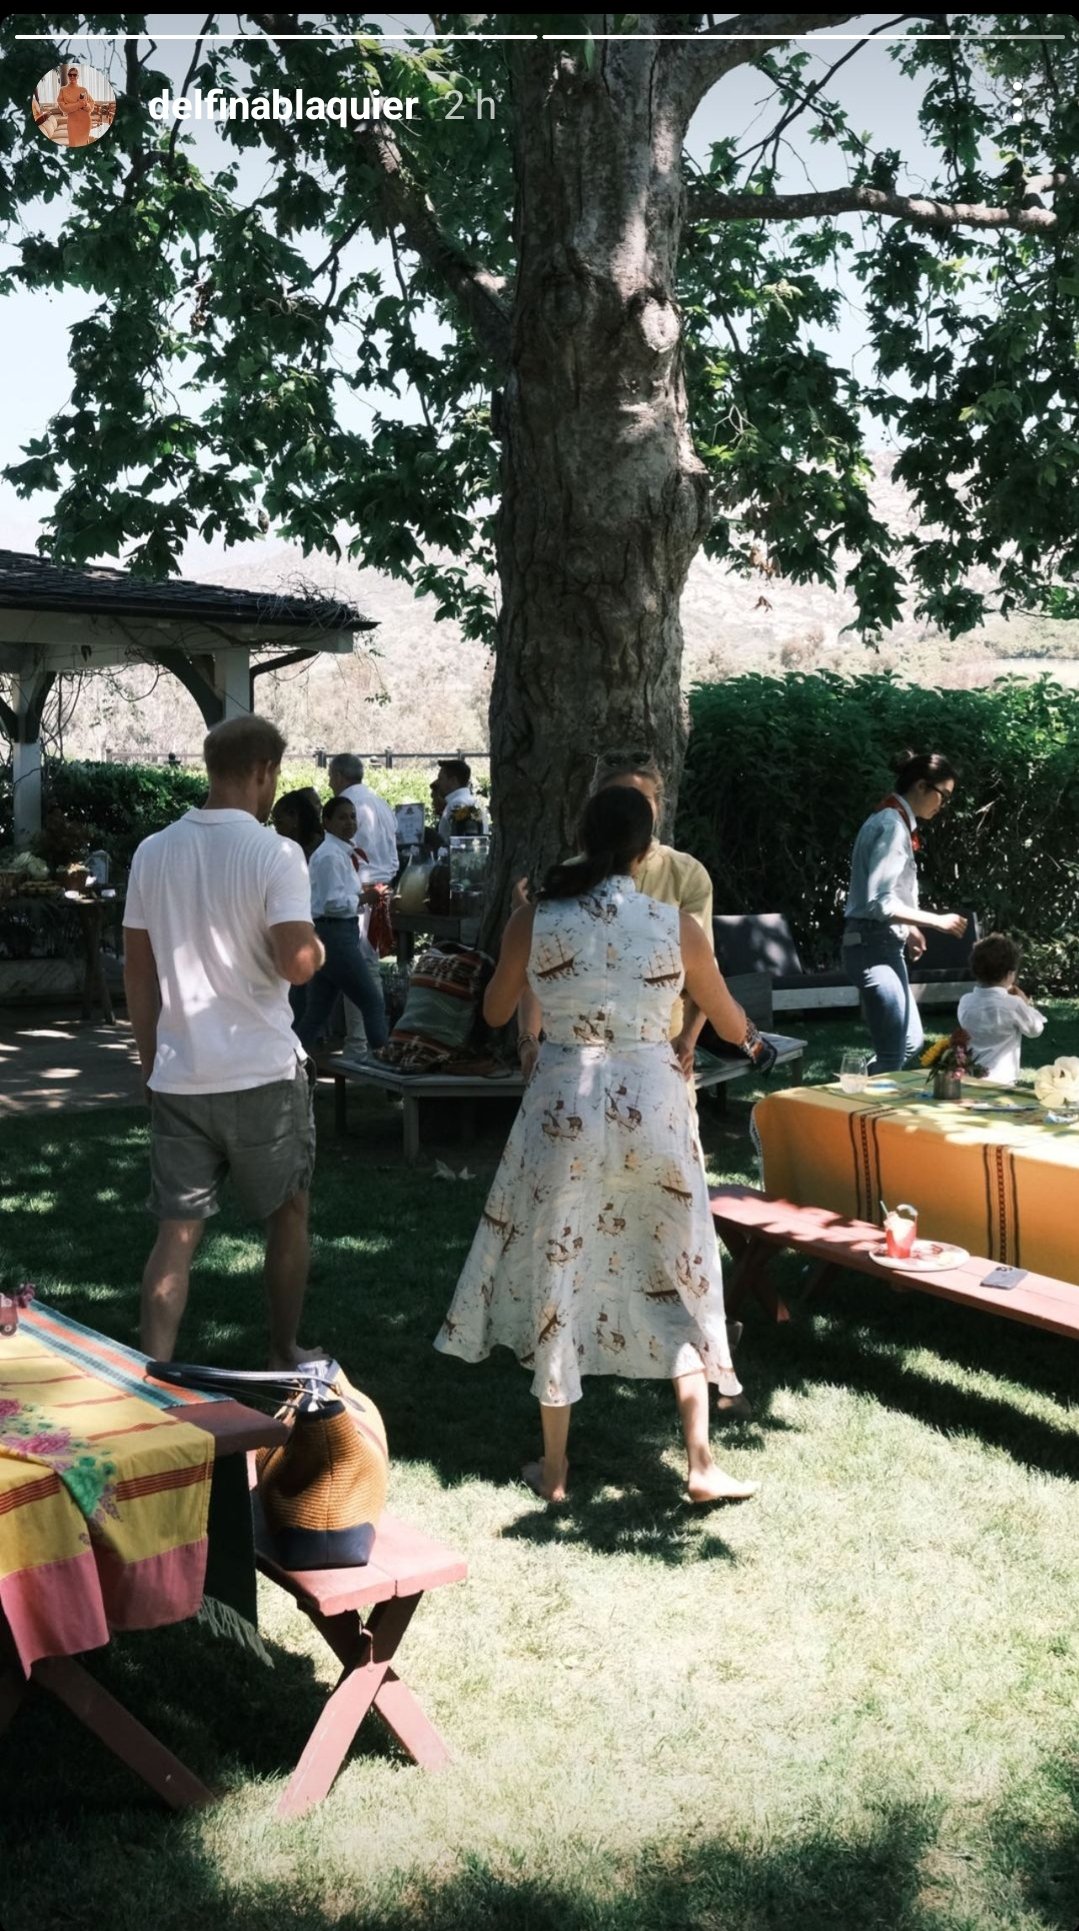 The Duke and Duchess of Sussex attended a BBQ with Nacho Figueras and his wife Delfina Blaquier on 28 May 2022